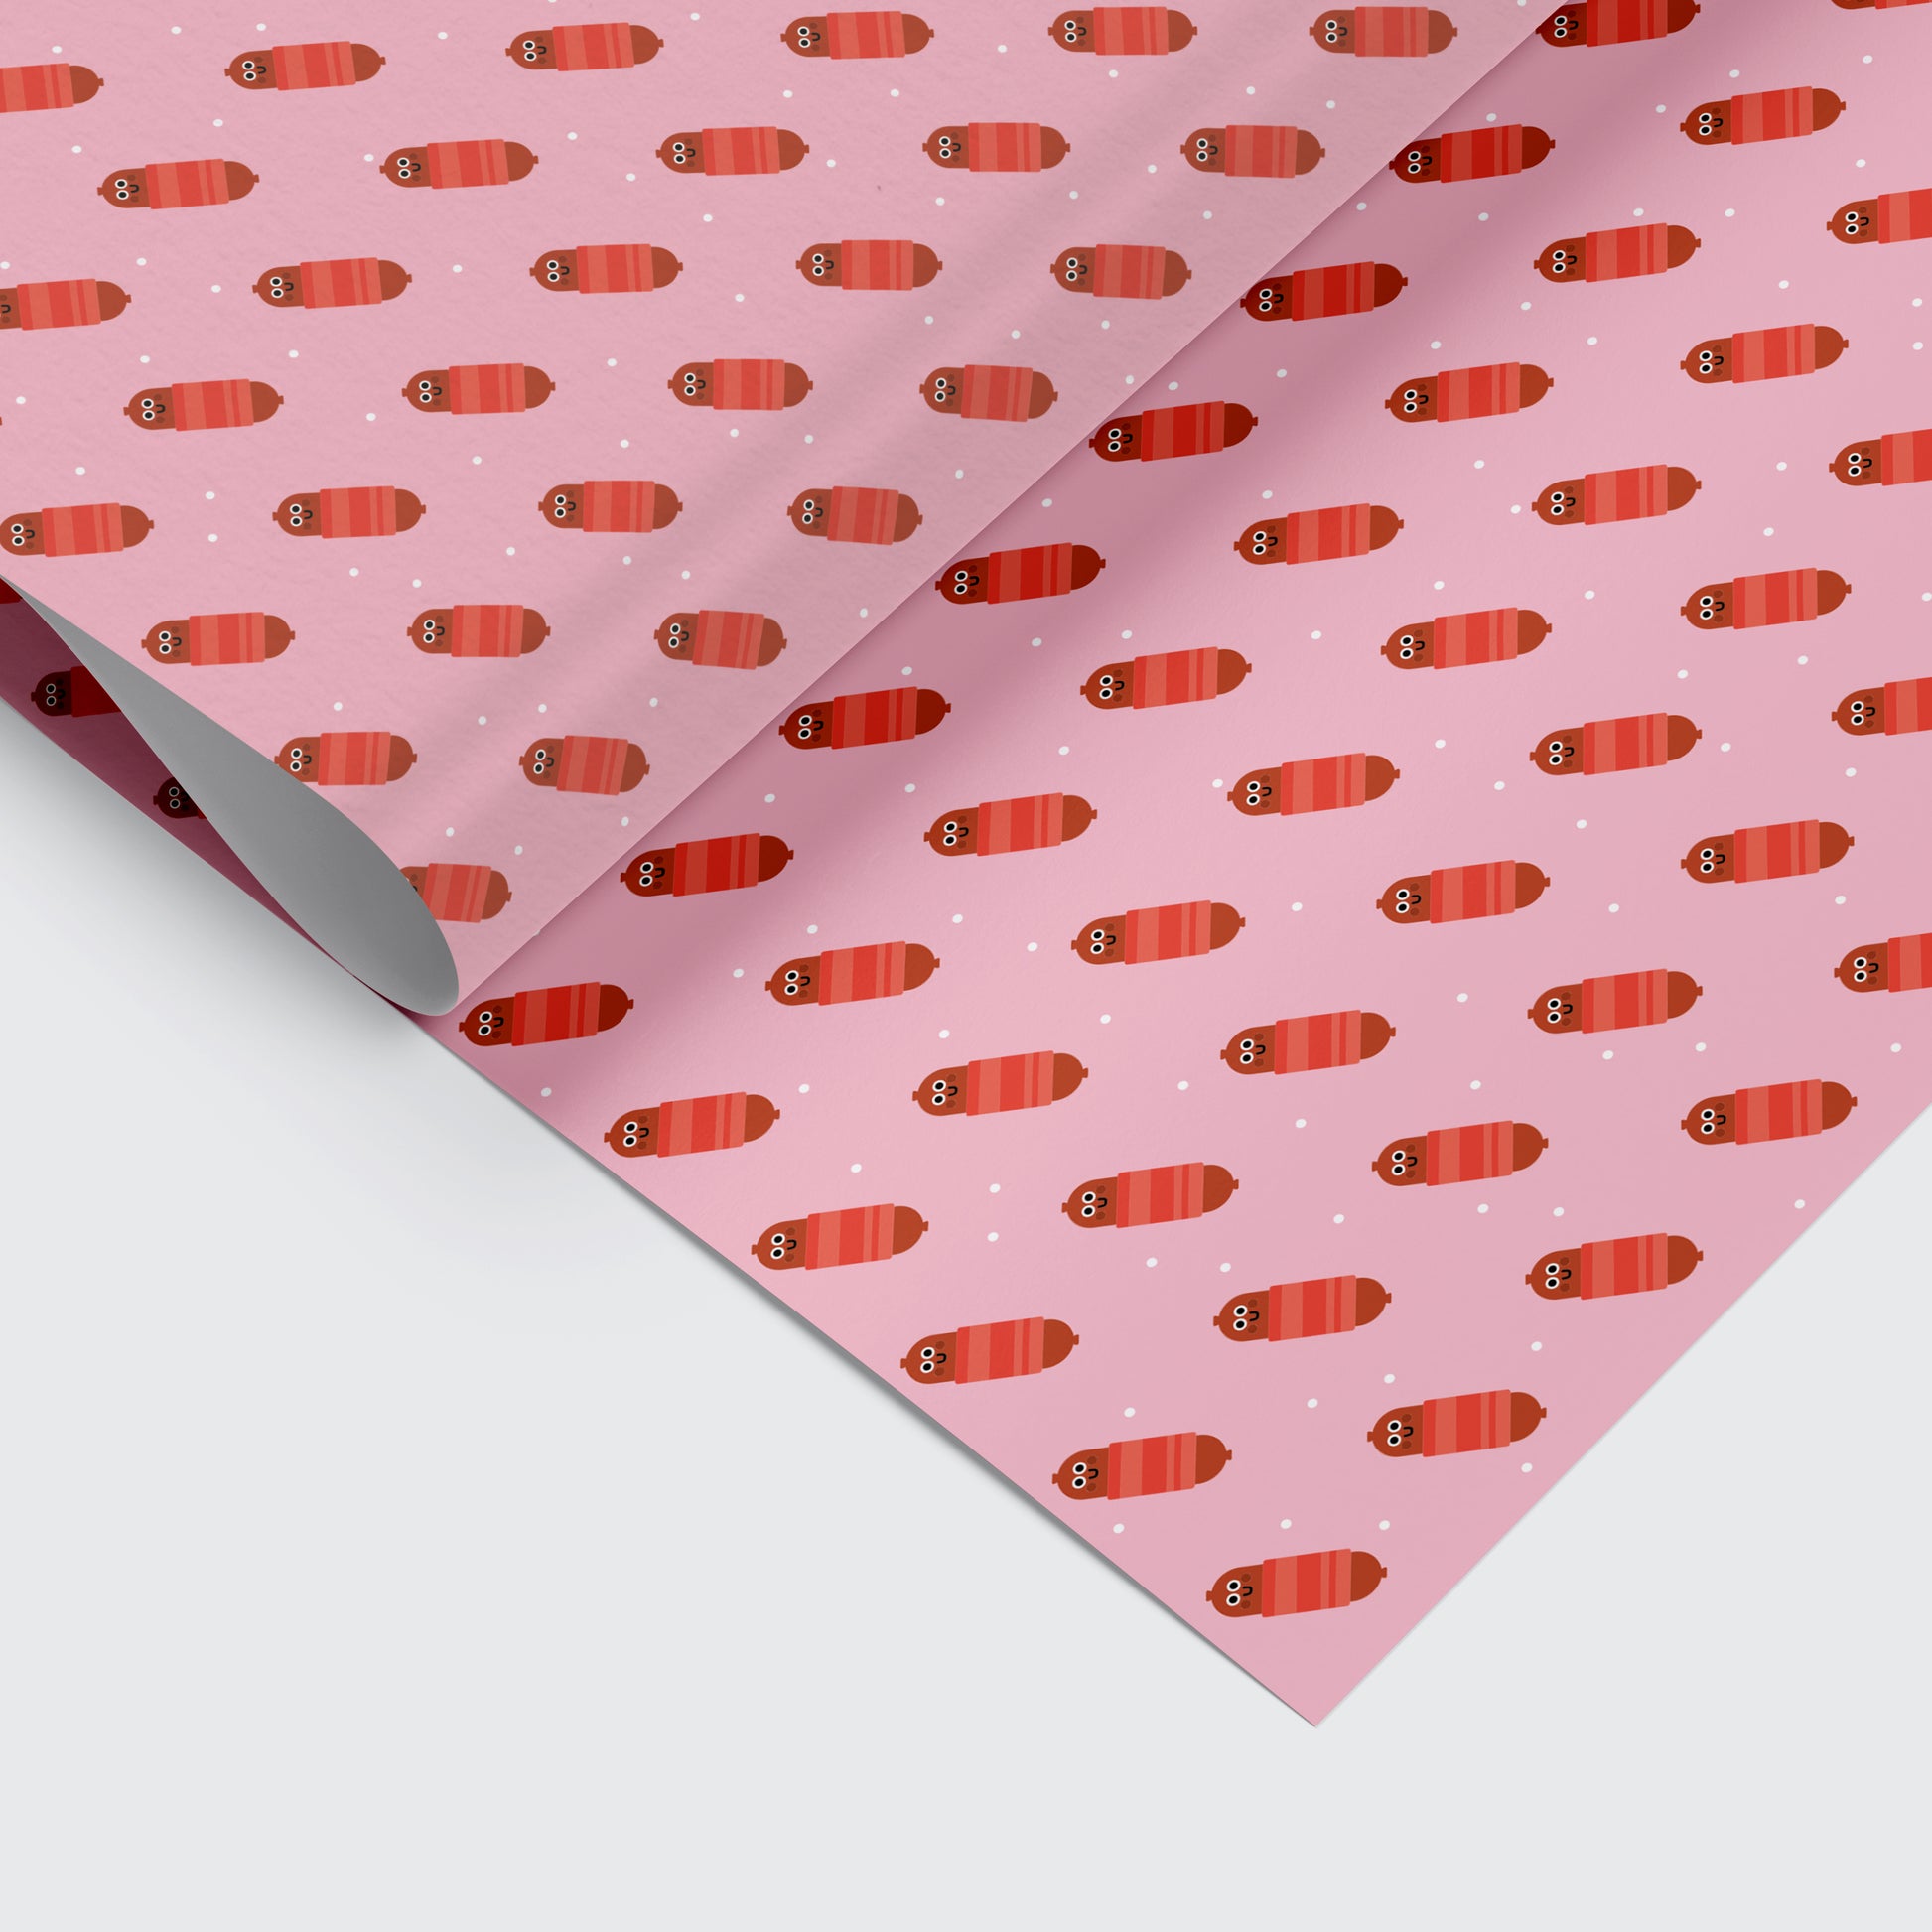 Christmas wrapping paper with pigs in blankets pattern on it